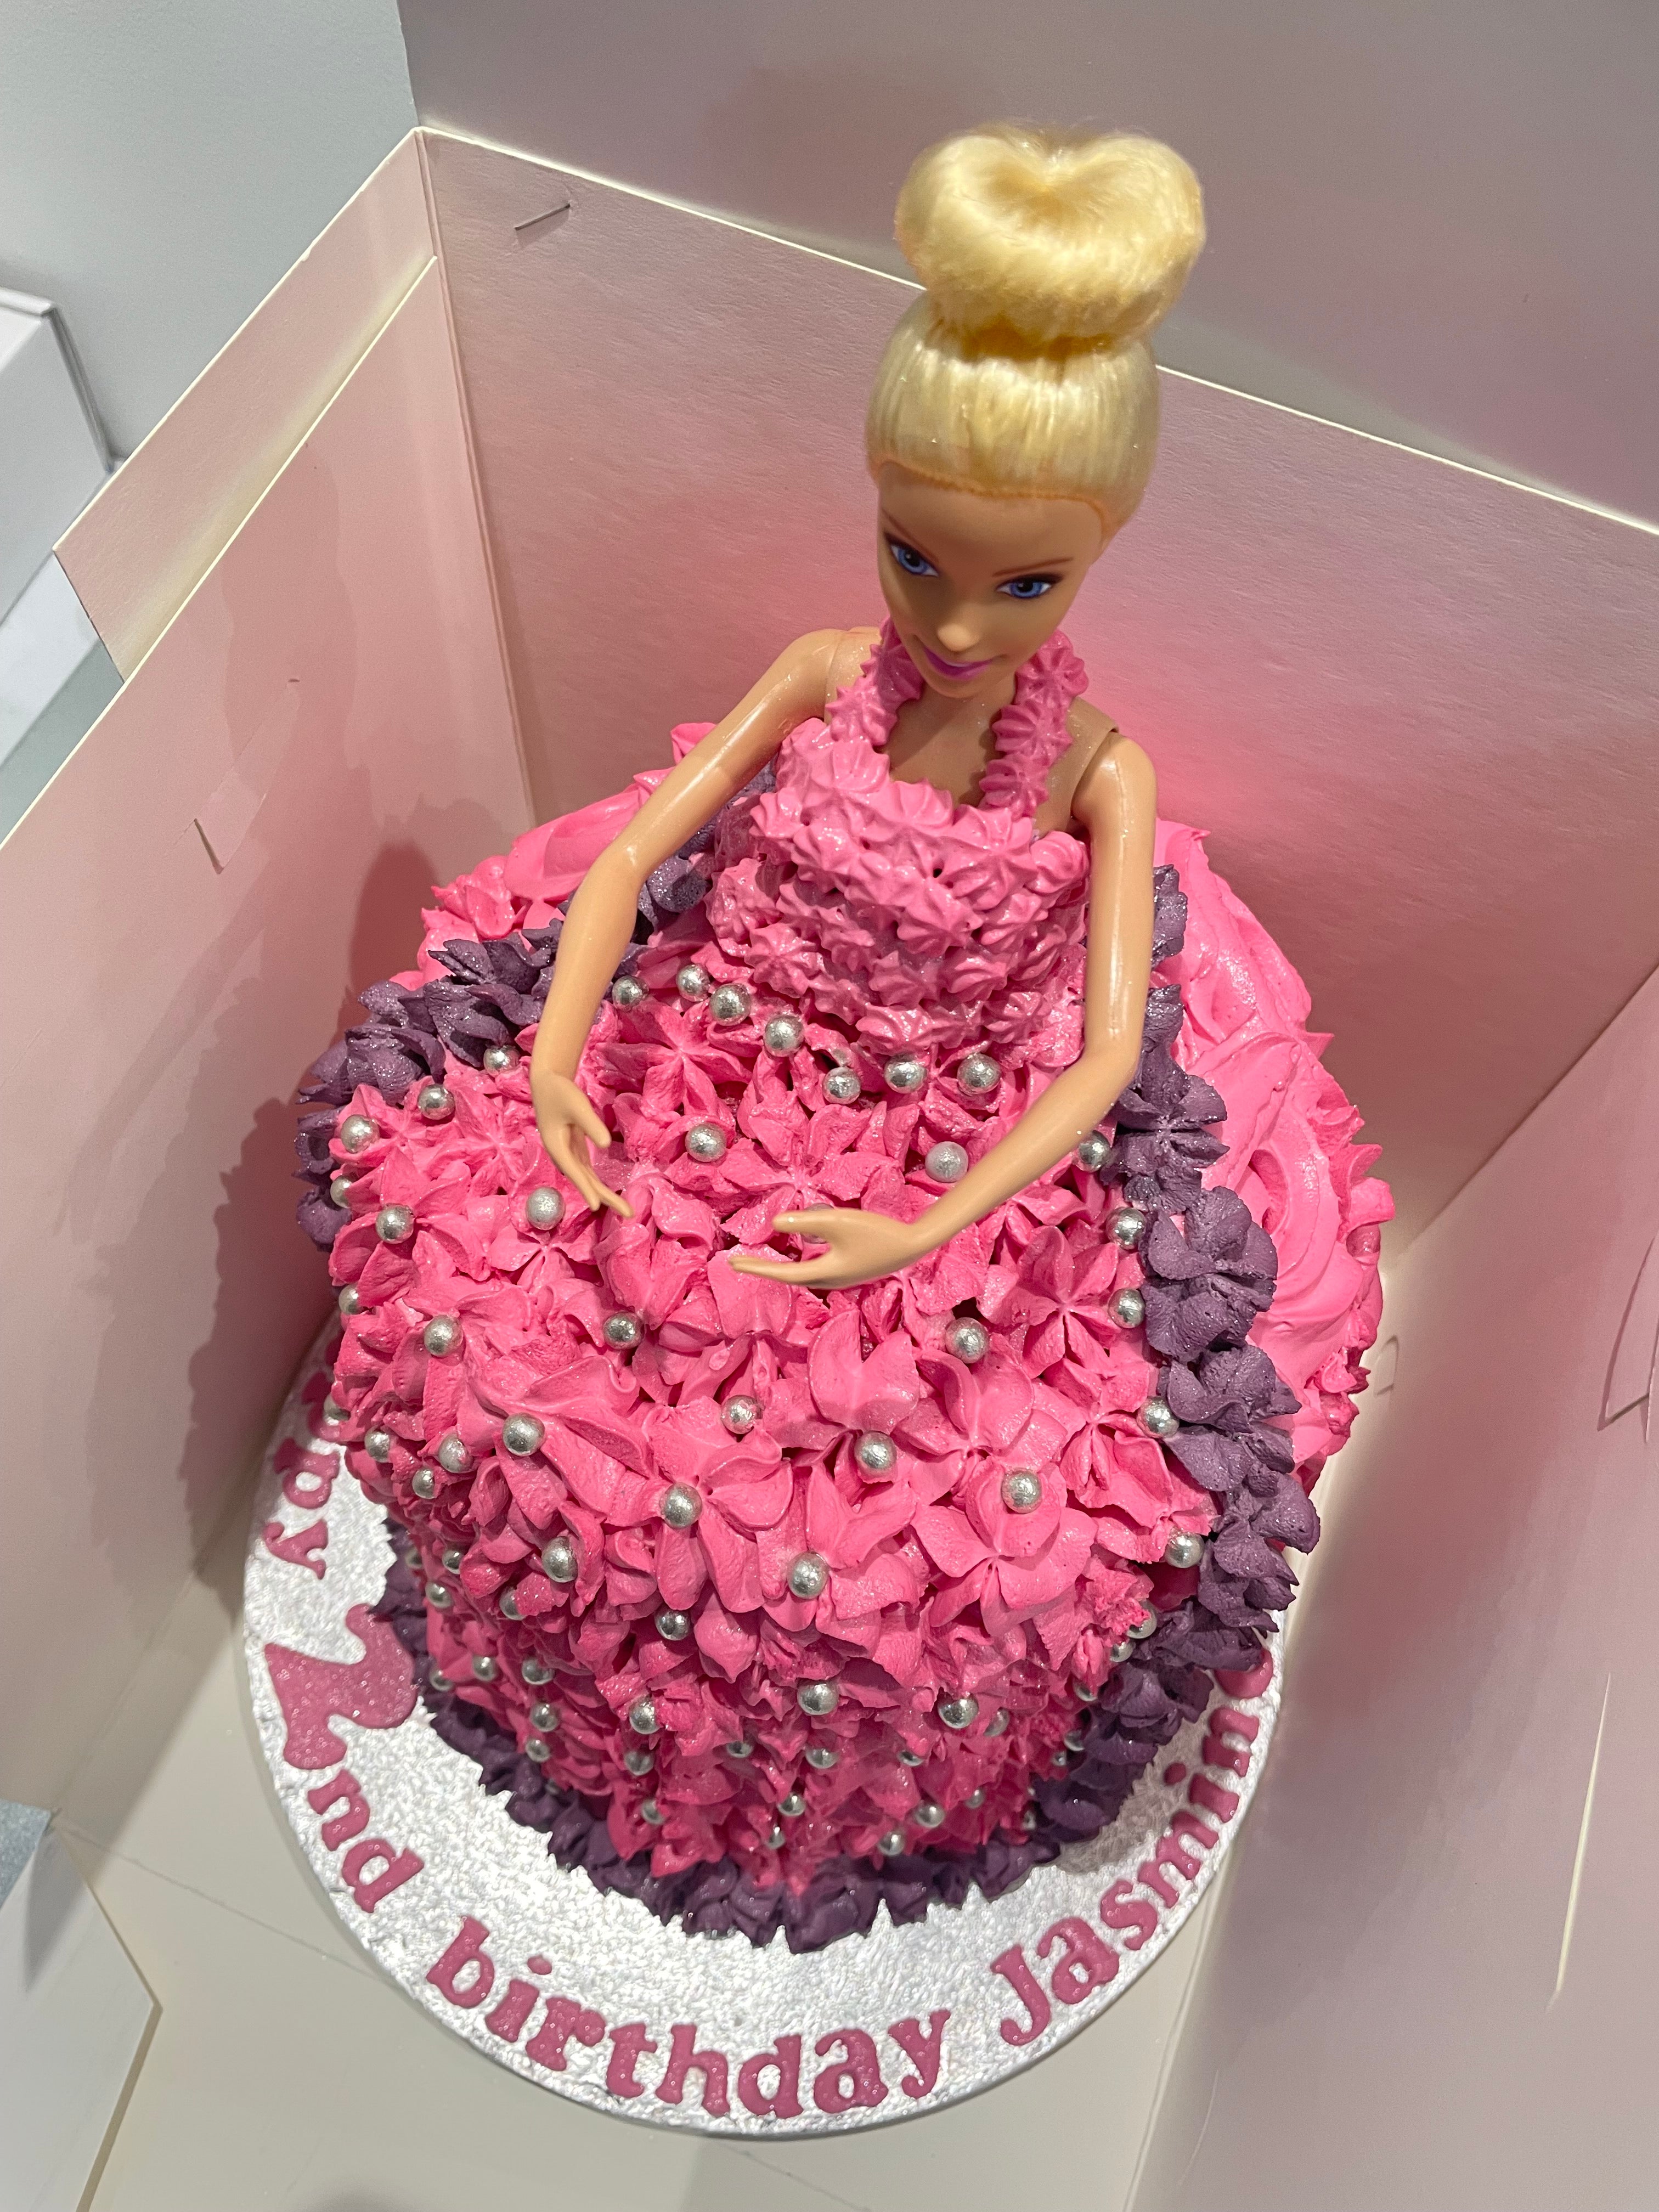 White And Pink Color Fresh And Eggless Customized Barbie Doll Cake  Additional Ingredient: Strawberry Cream at Best Price in Delhi | R J, S  Cakes N Bakes